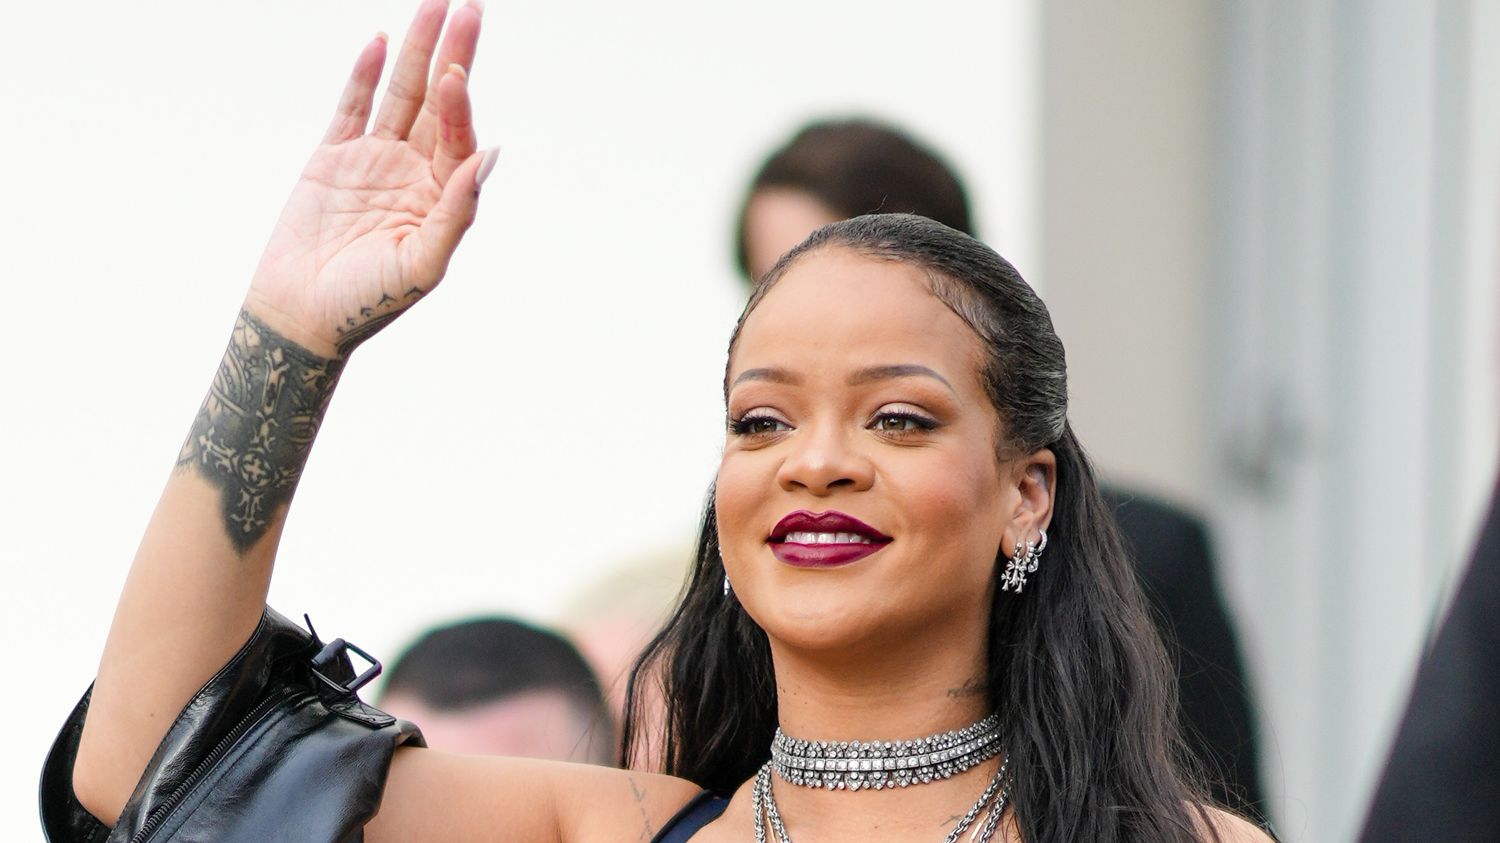 How Rihanna's baby bump sparked this year's chicest maternity